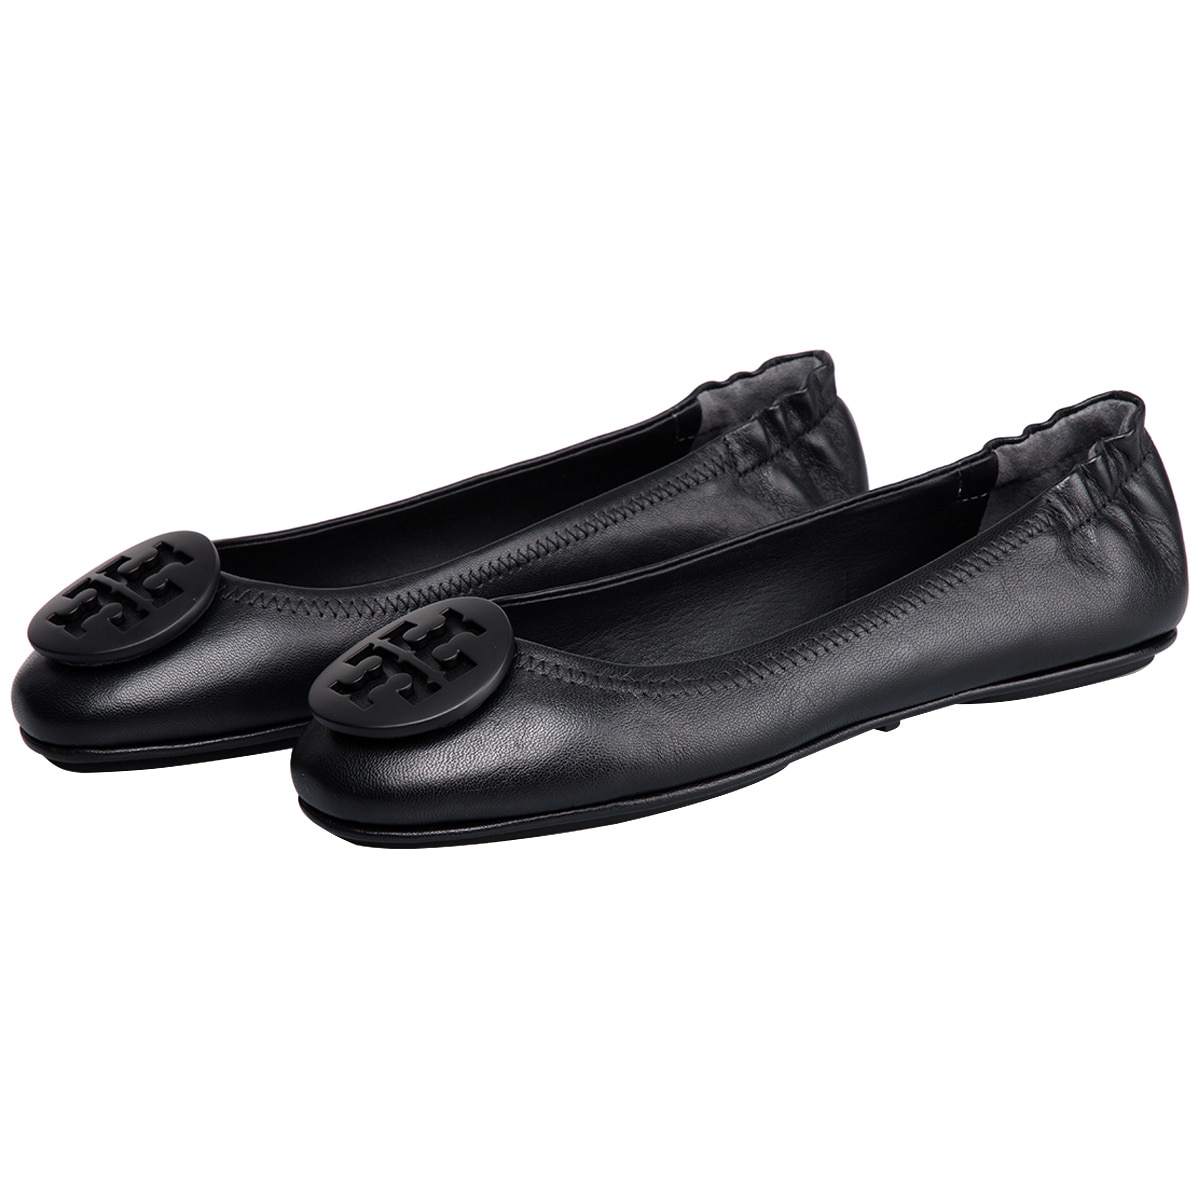 Buy > tory burch minnie flats review > in stock